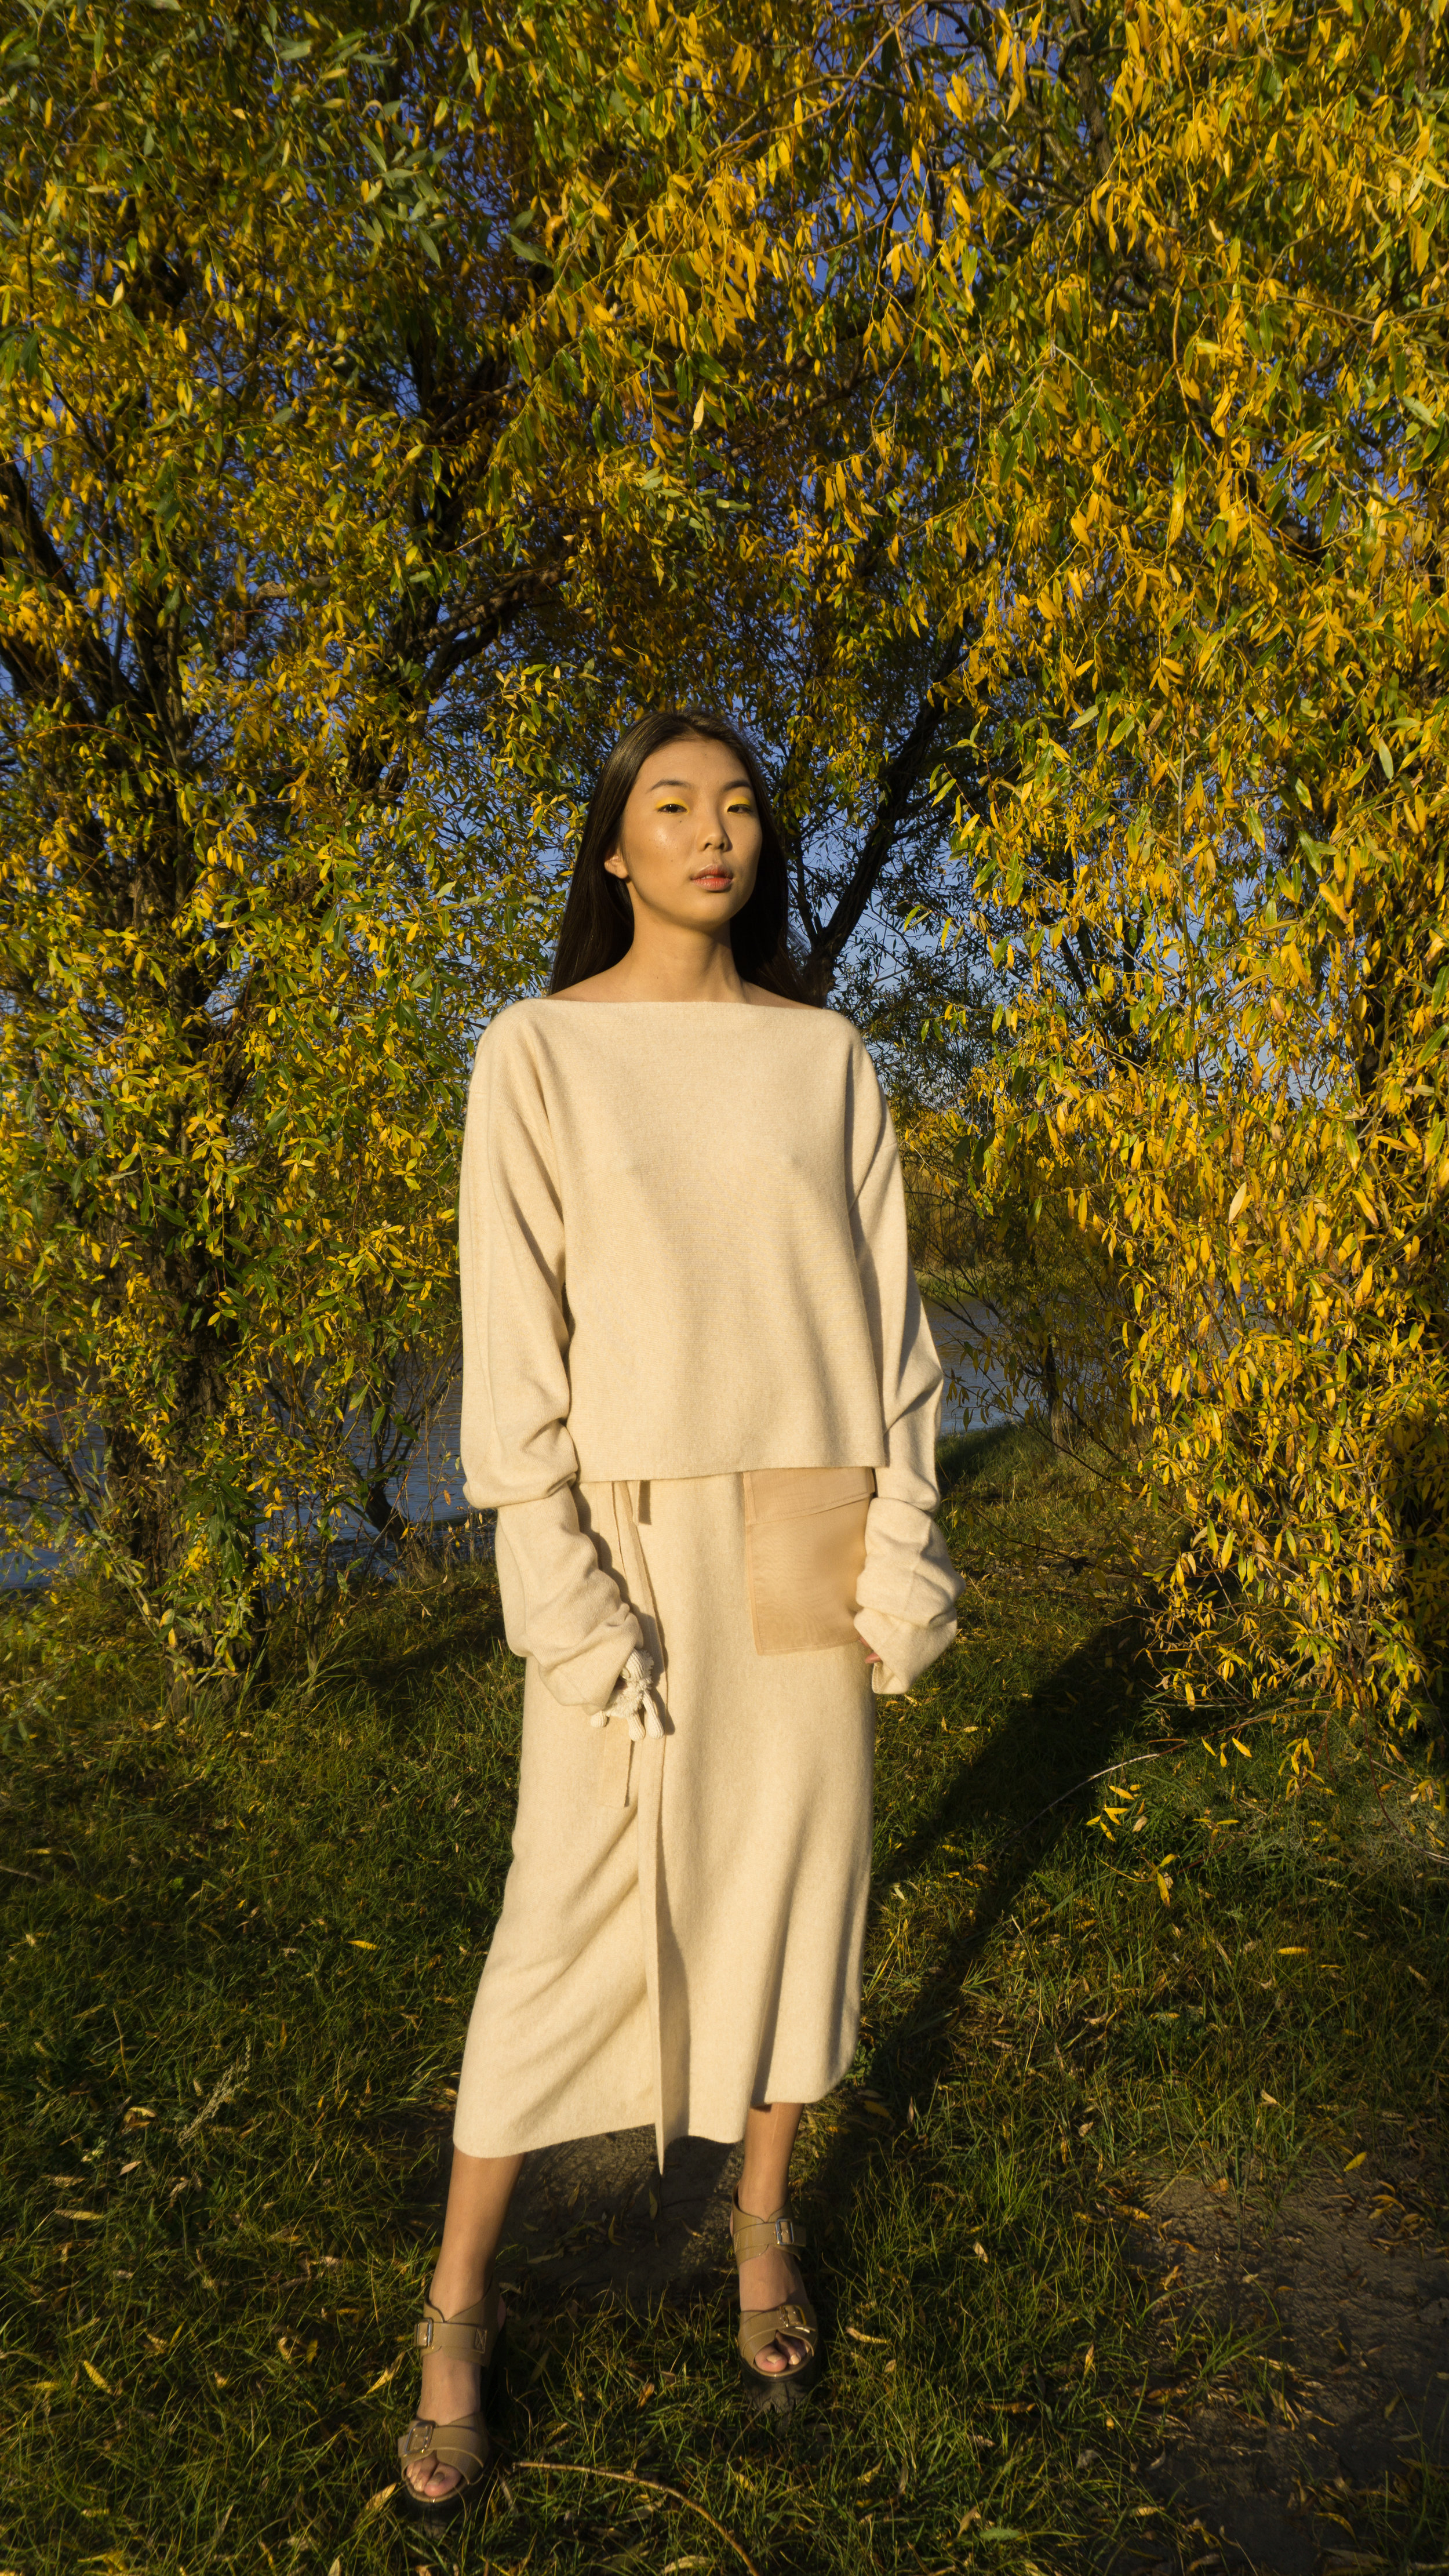 Mandkhai SS18 long sleeve top and wrap skirt shot in Mongolia